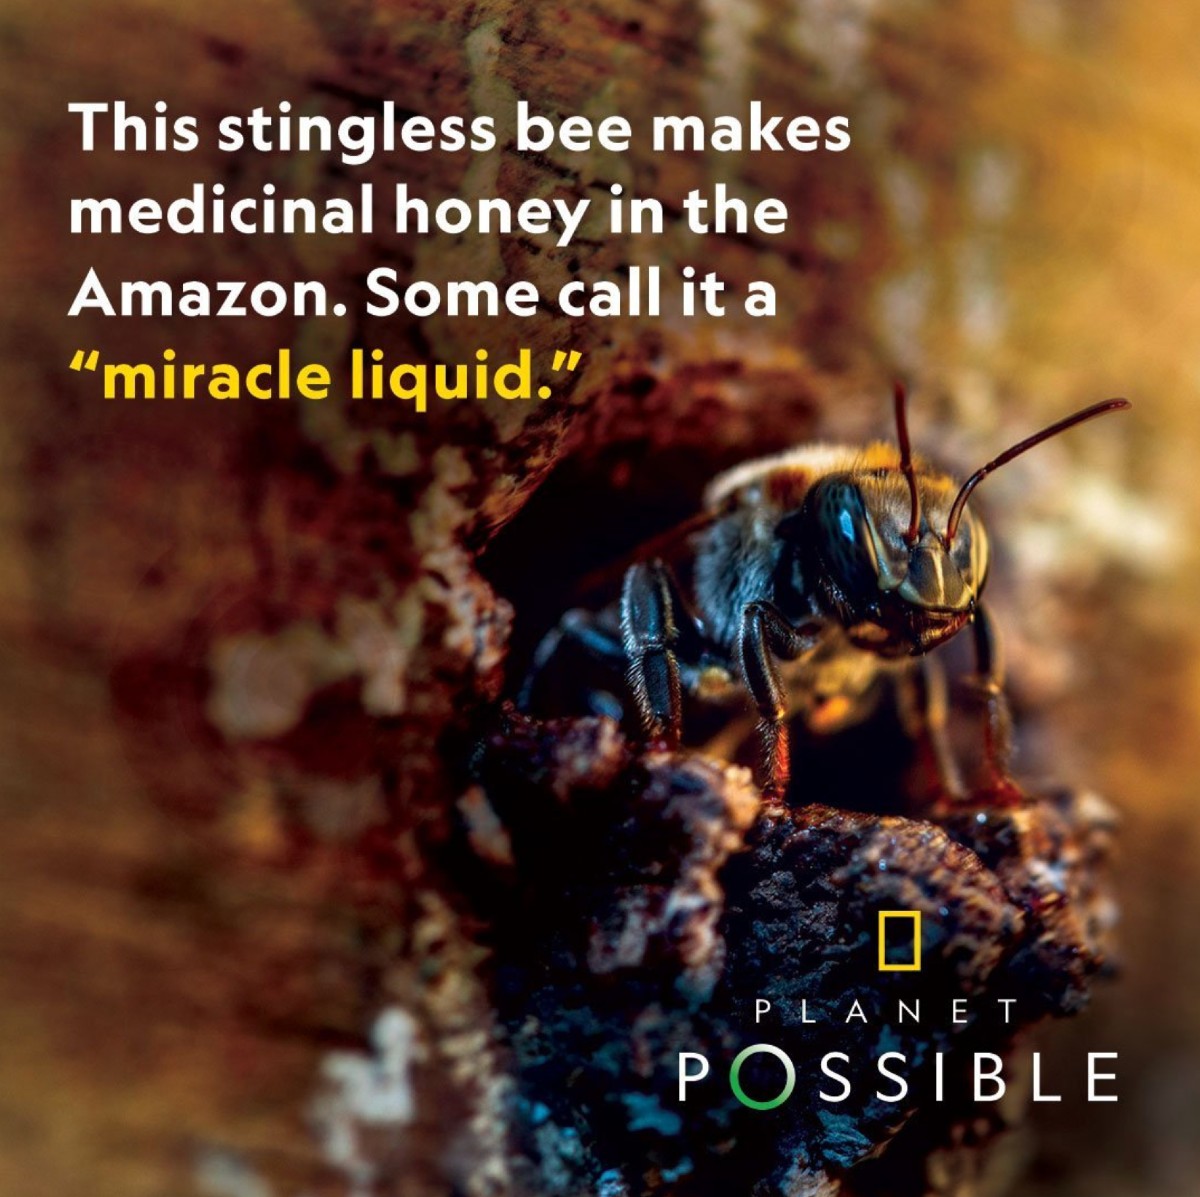 An Instagram post on National Geographic's Instagram page ft. a stingless bee and the words "this stingless beee makes medicinal honey in the Amazon. Some call it a "miracle liquid."" 